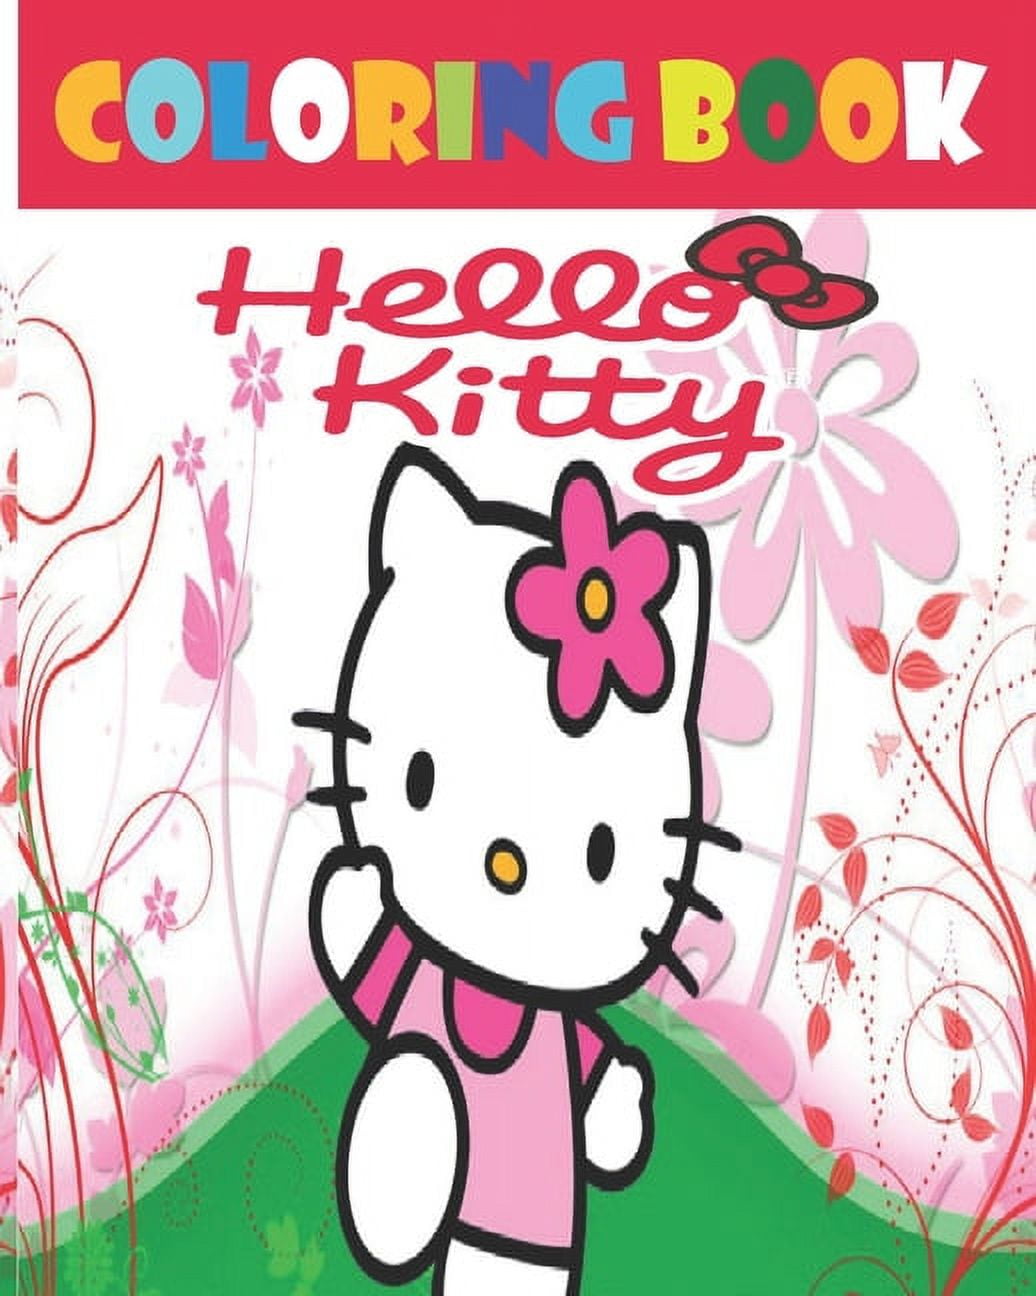 Kitty's Coloring Activity Book: Schoolies™(Paperback) - Books By The Bushel